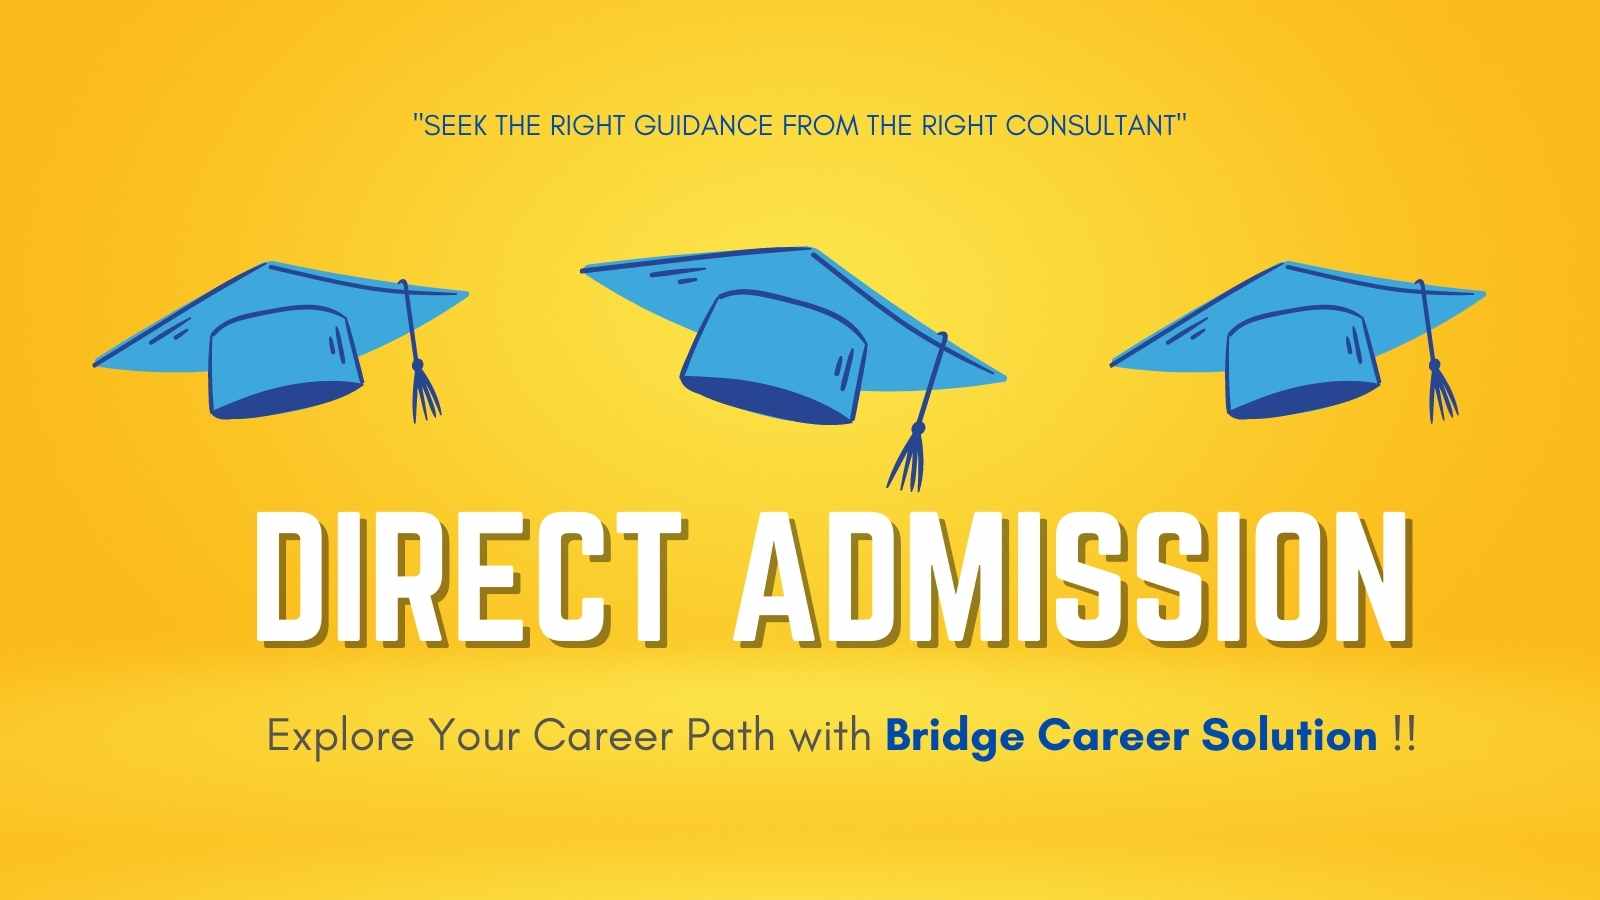 About Bridge Career Solutions